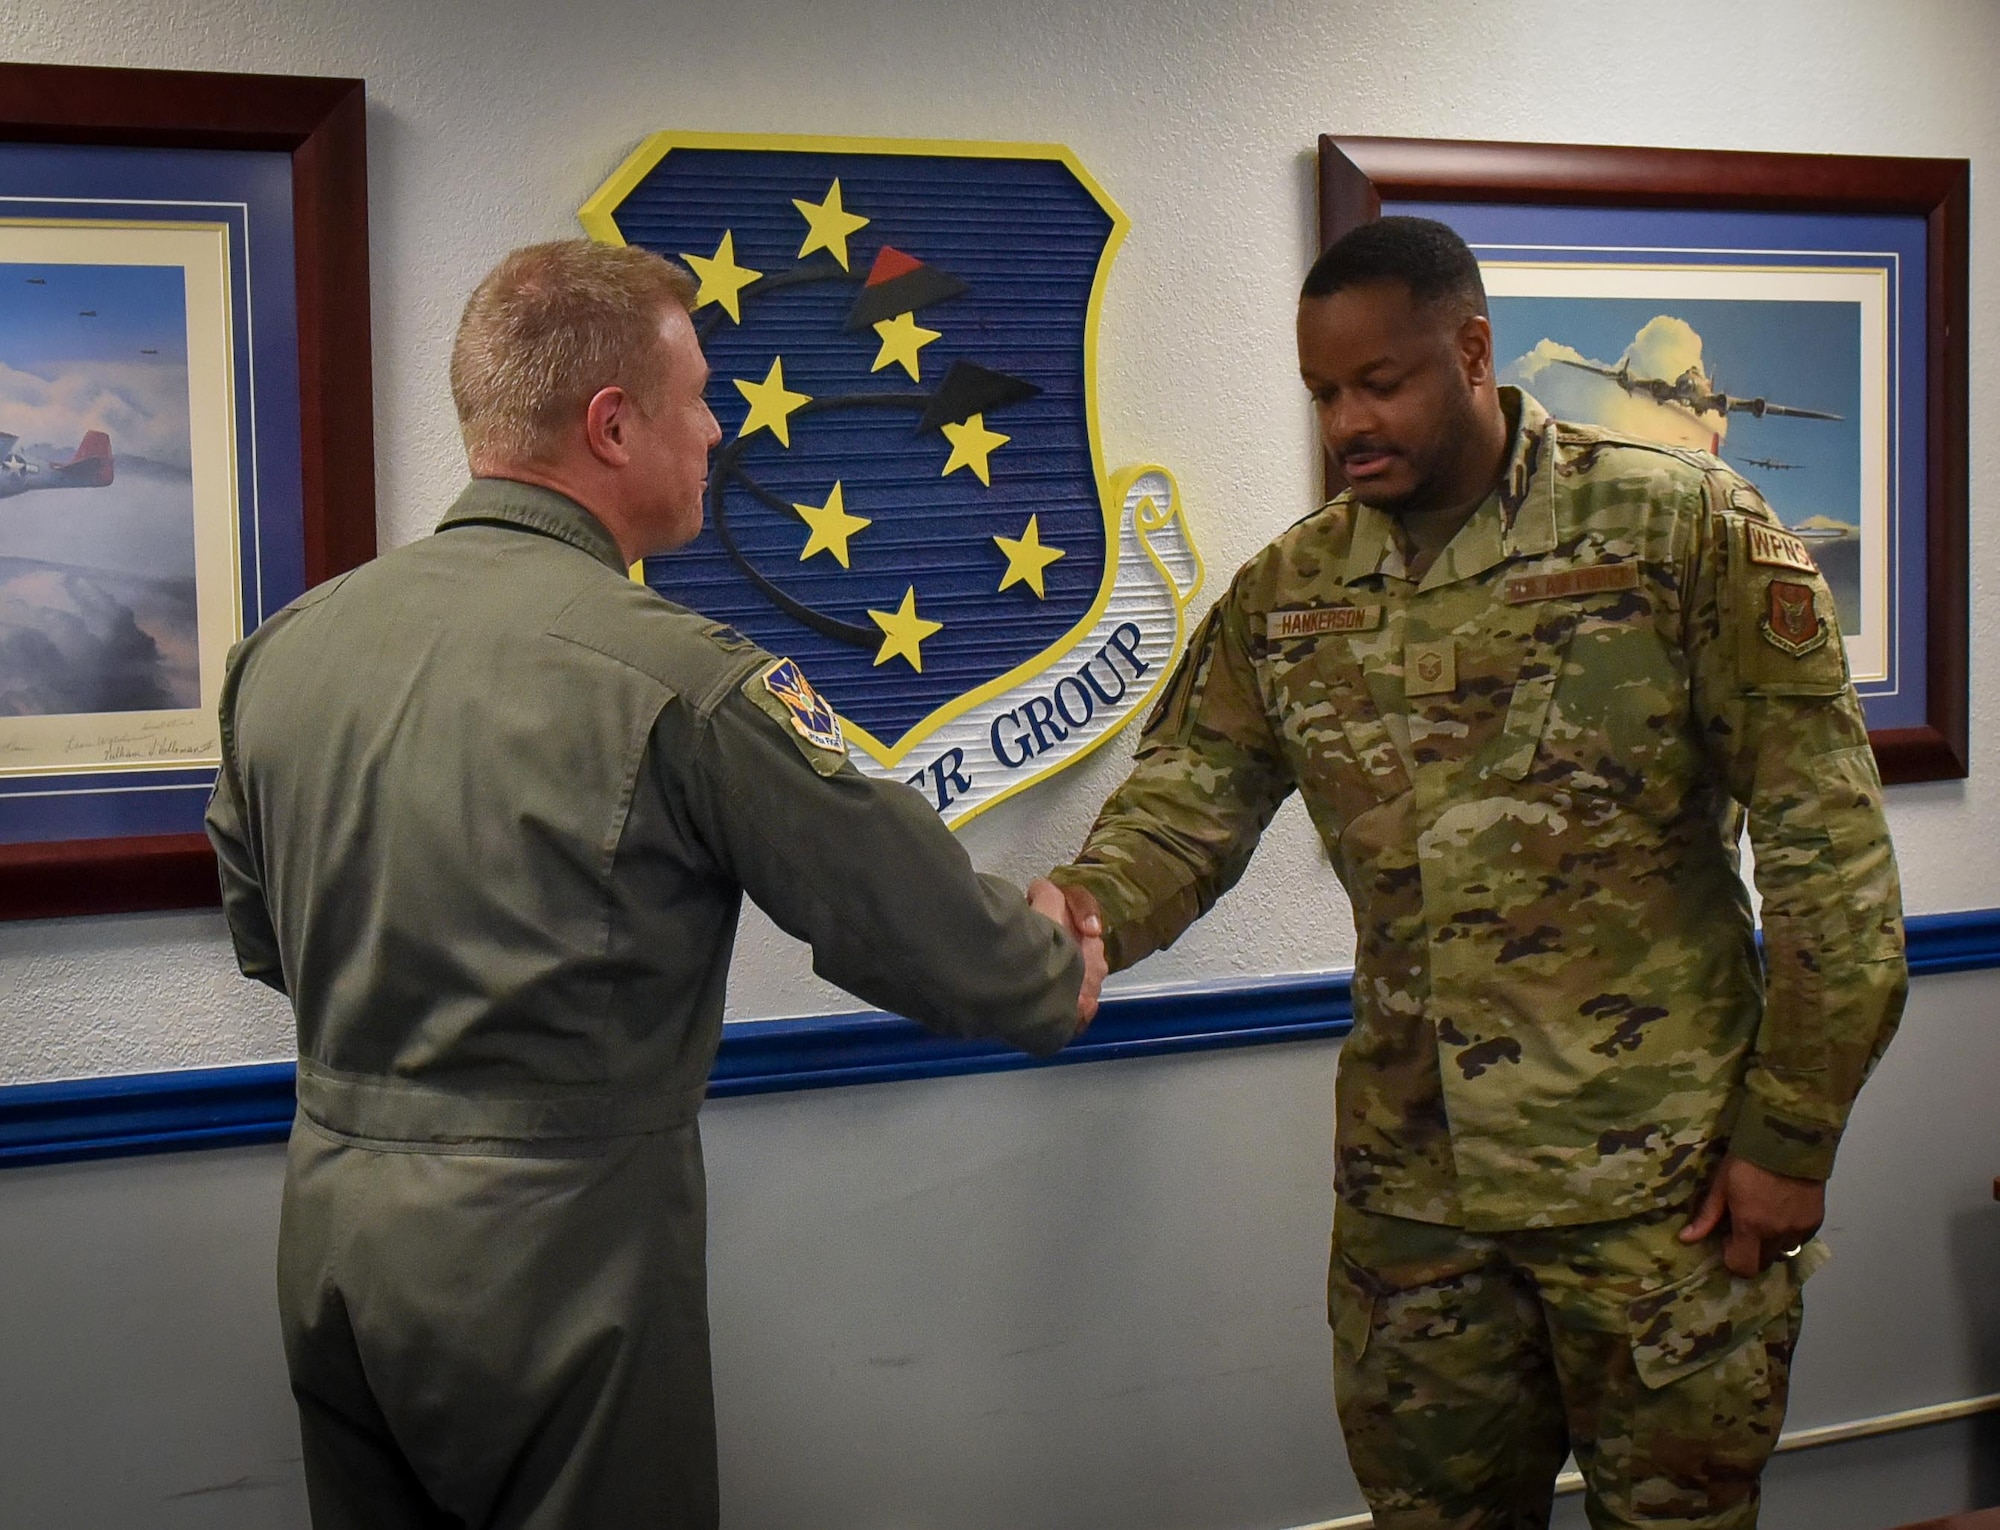 (left) 301st Fighter Wing Commander Col. Allen Duckworth gives his commander's coin to recognize Master Sgt. Rodney Hankerson, 44th Fighter Group Weapons Section chief during the wing's visit to the 44 FG at Eglin Air Force Base, Fla., March 4. Hankerson, who also works in the same position as a civilian, recently won the Gen. Leo Marquez Award at the AFRC level for Aircraft Maintenance Civilian Technician category. This award recognizes base-level civil service aircraft, munitions and missile maintenance personnel who perform hands-on maintenance or manage a maintenance function. (U.S. Air Force photo by Master Sgt. Jeremy Roman)